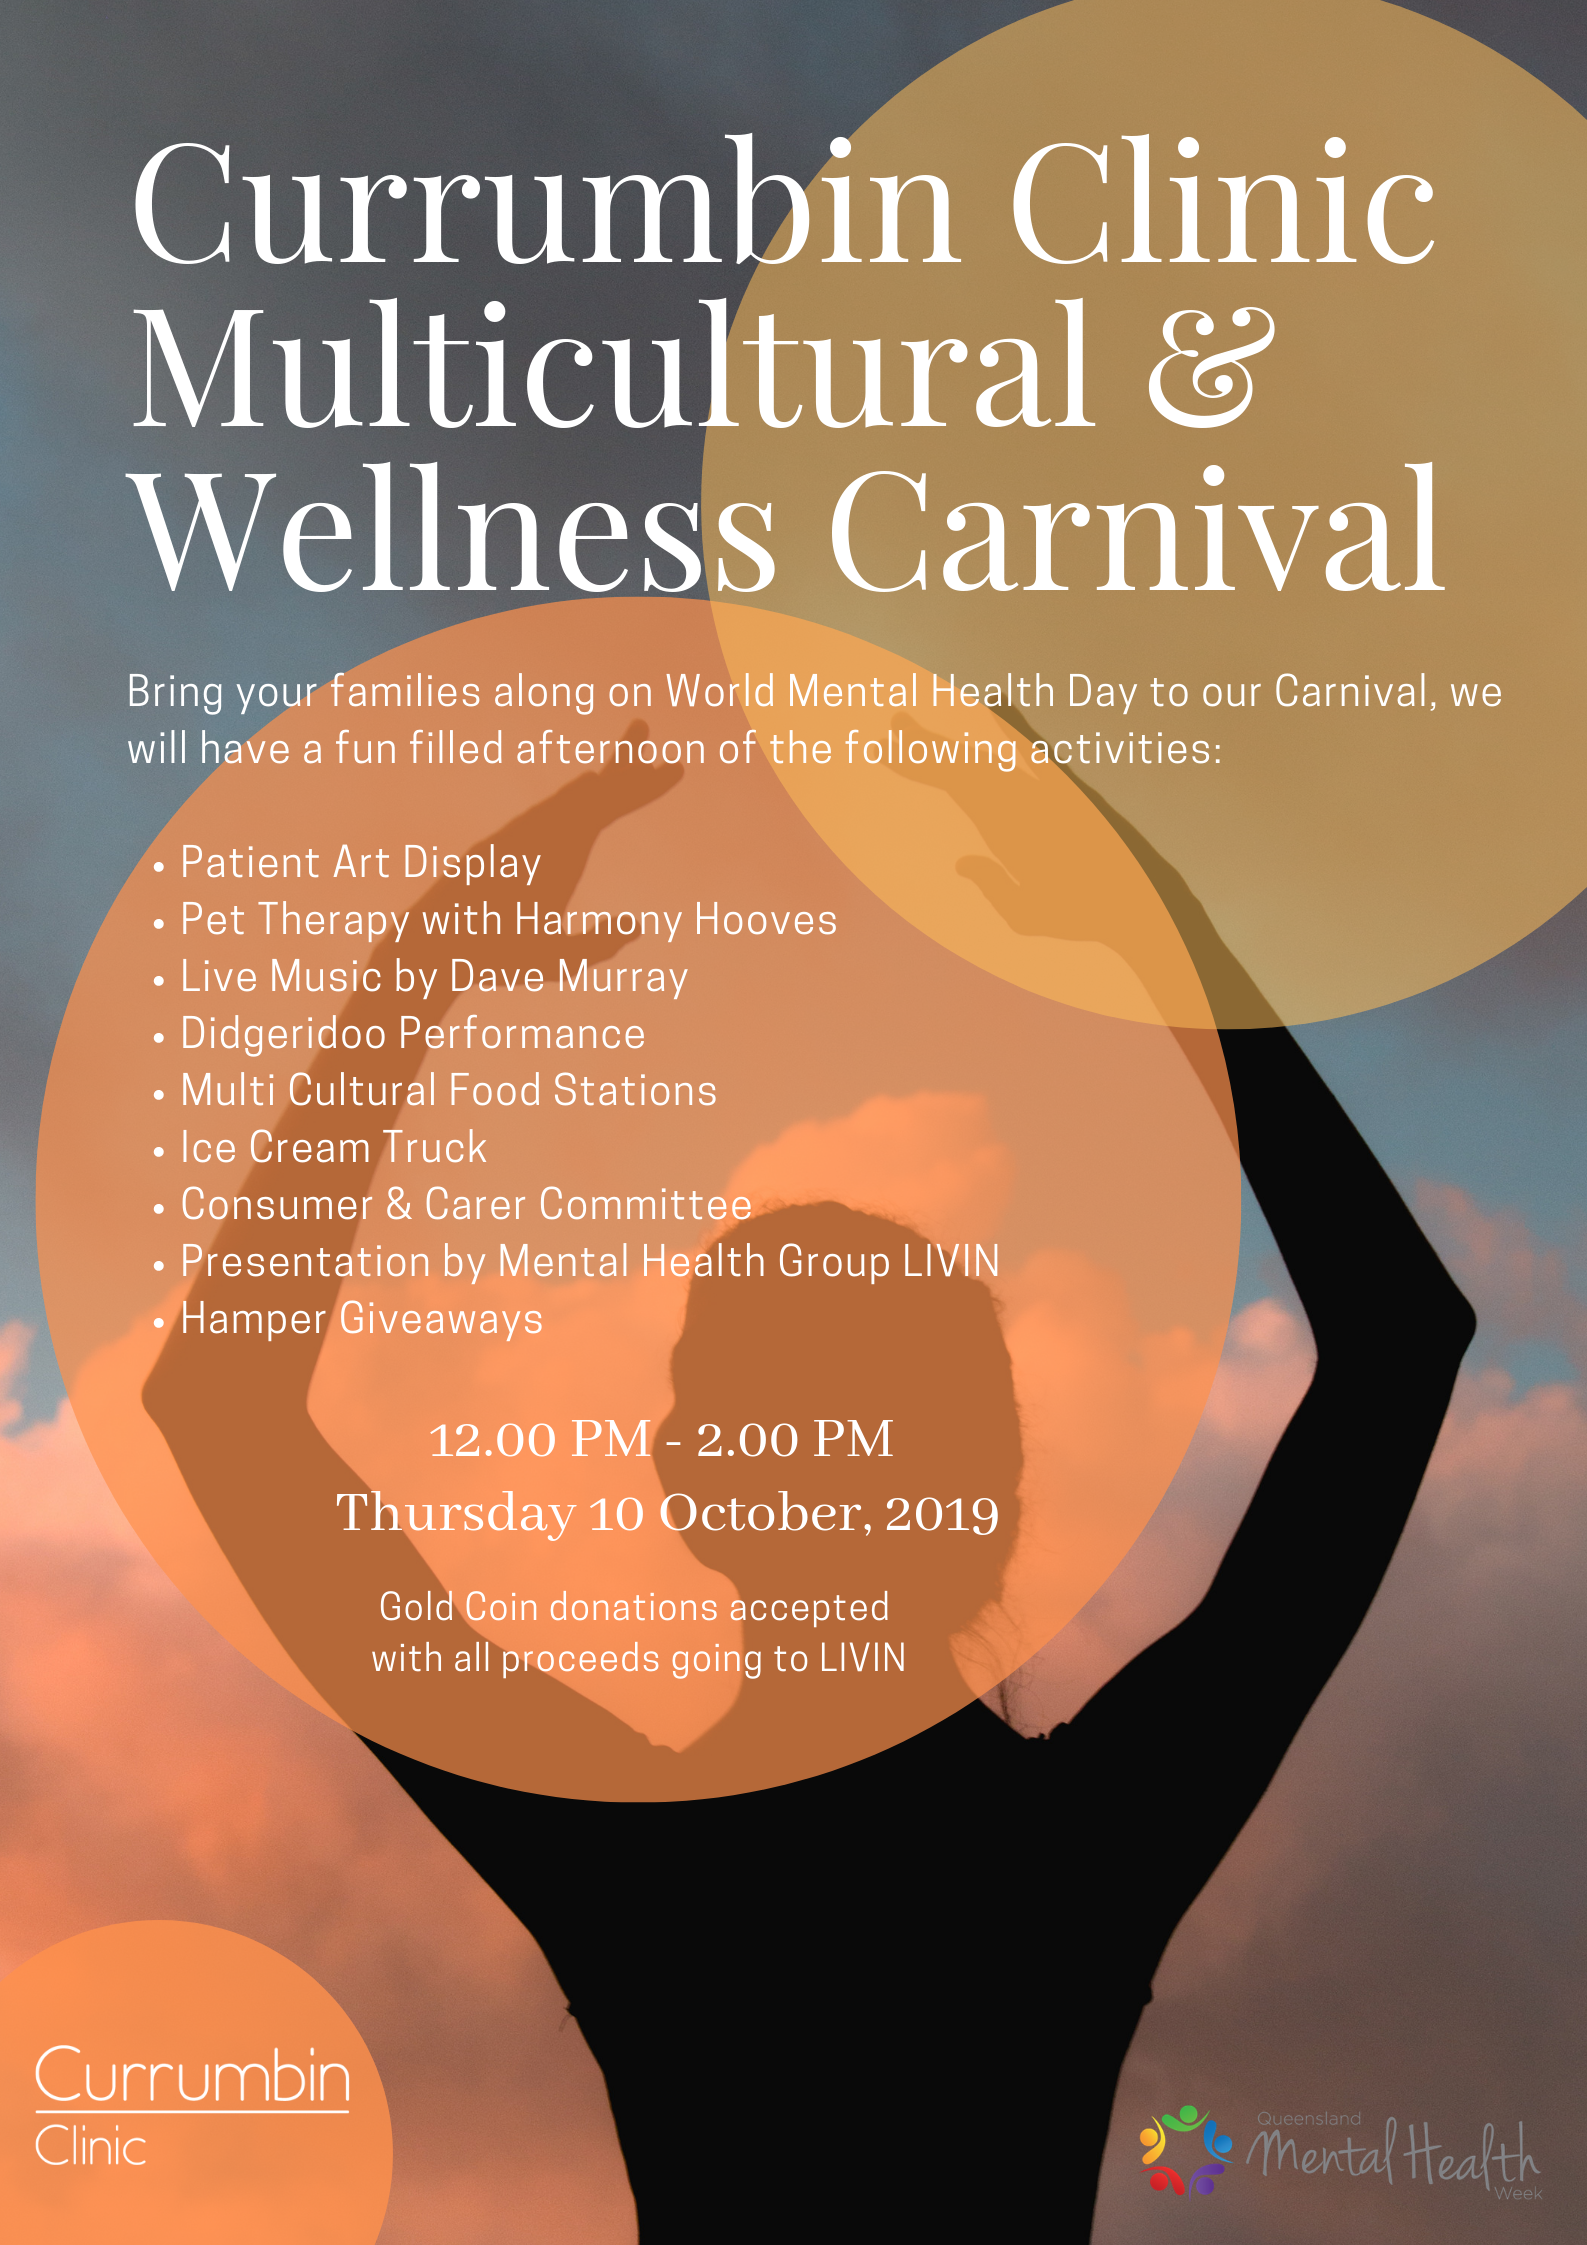 Currumbin-Clinic-Multicultural-and-Wellness-Carnival.png#asset:3283